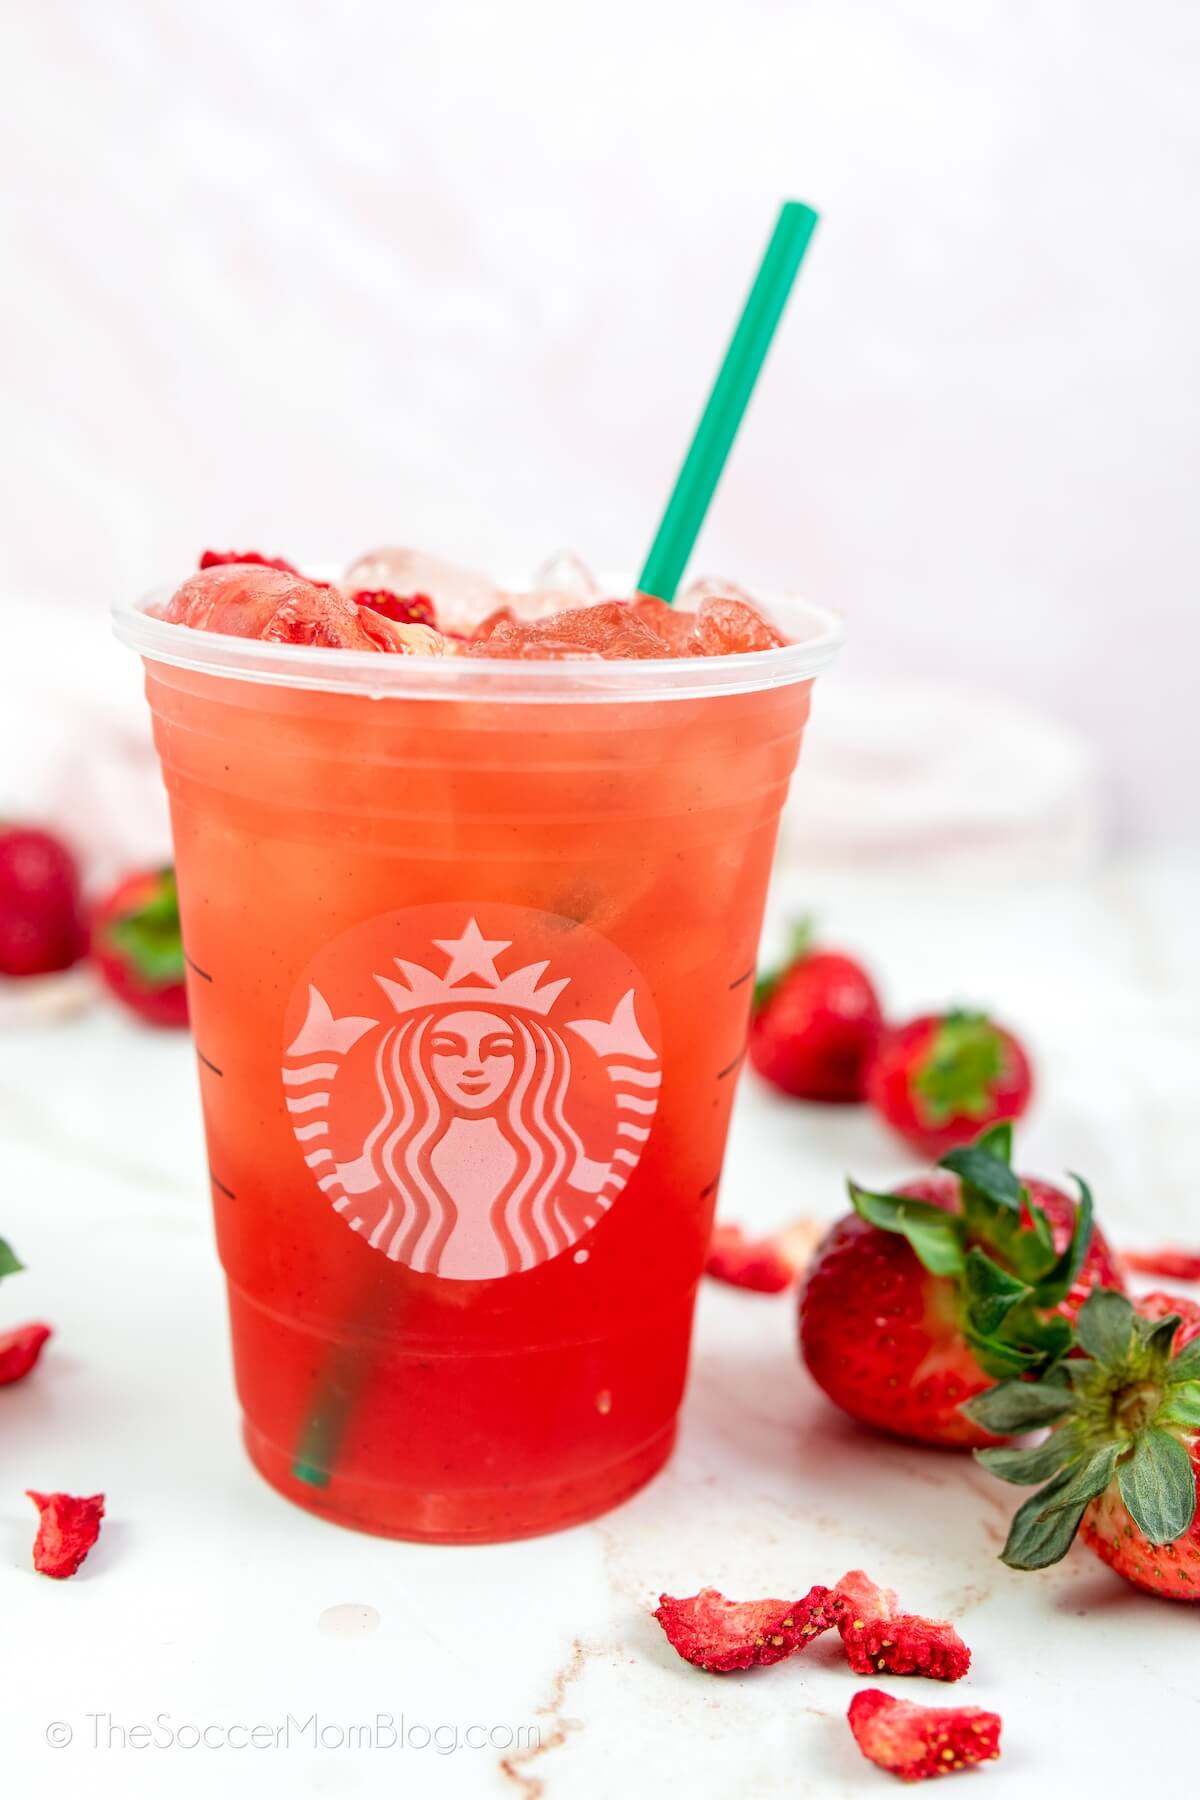 Starbucks strawberry acai refresher drink, surrounded by fresh berries